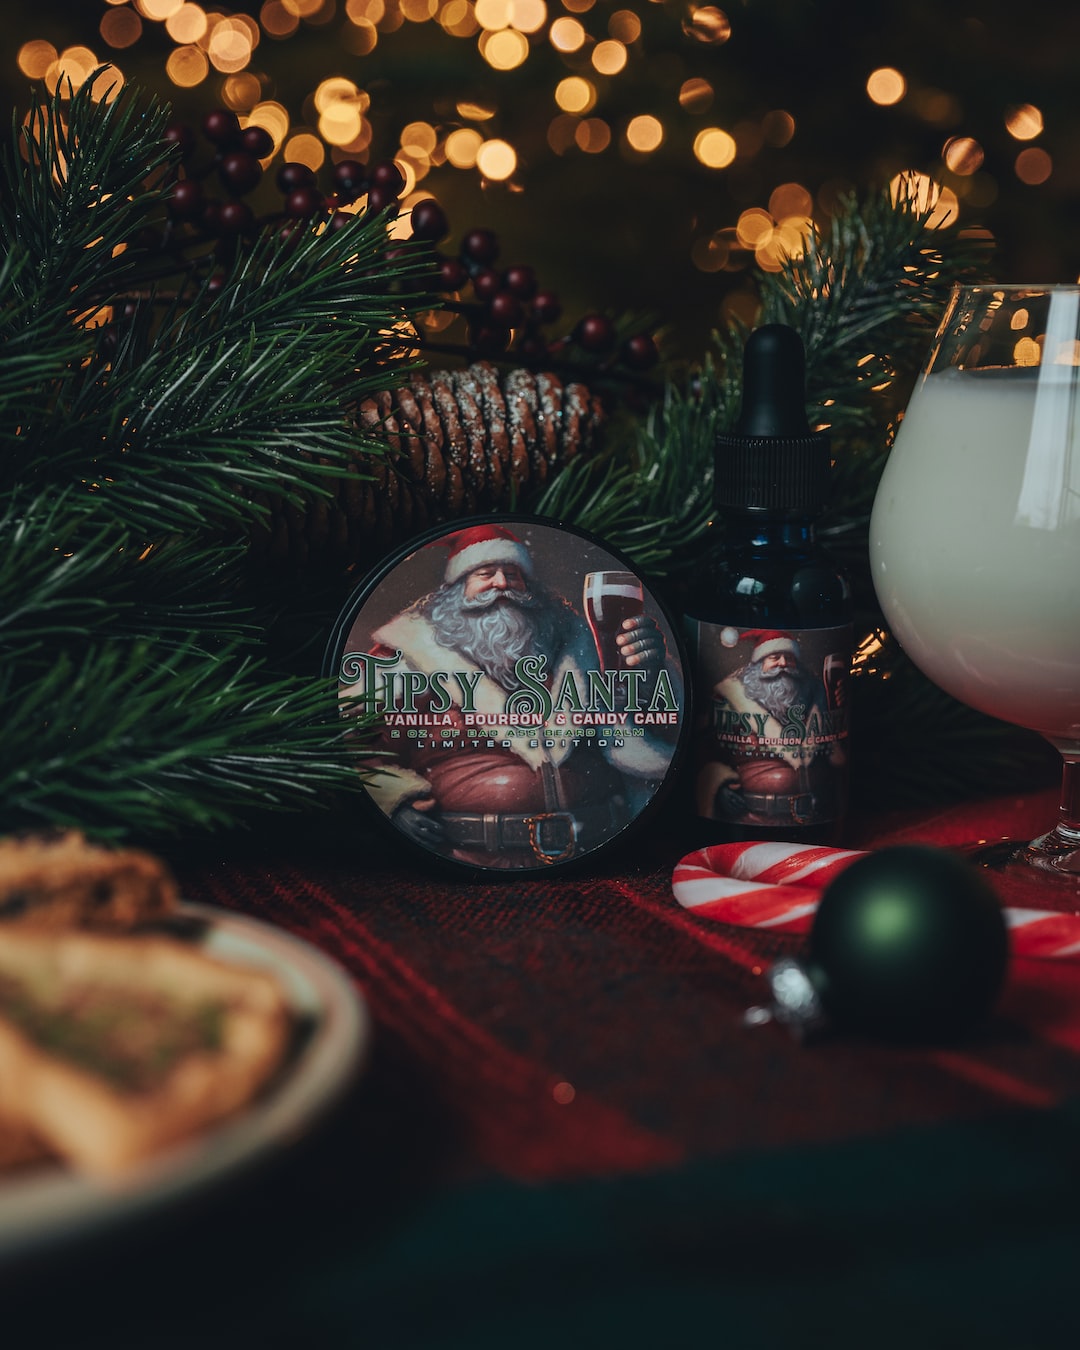 Christmas themed Product photo of Tipsy Santa Beard Balm and Beard Oil by Daily Grind Beard Co. Product Photography by Lance Reis.